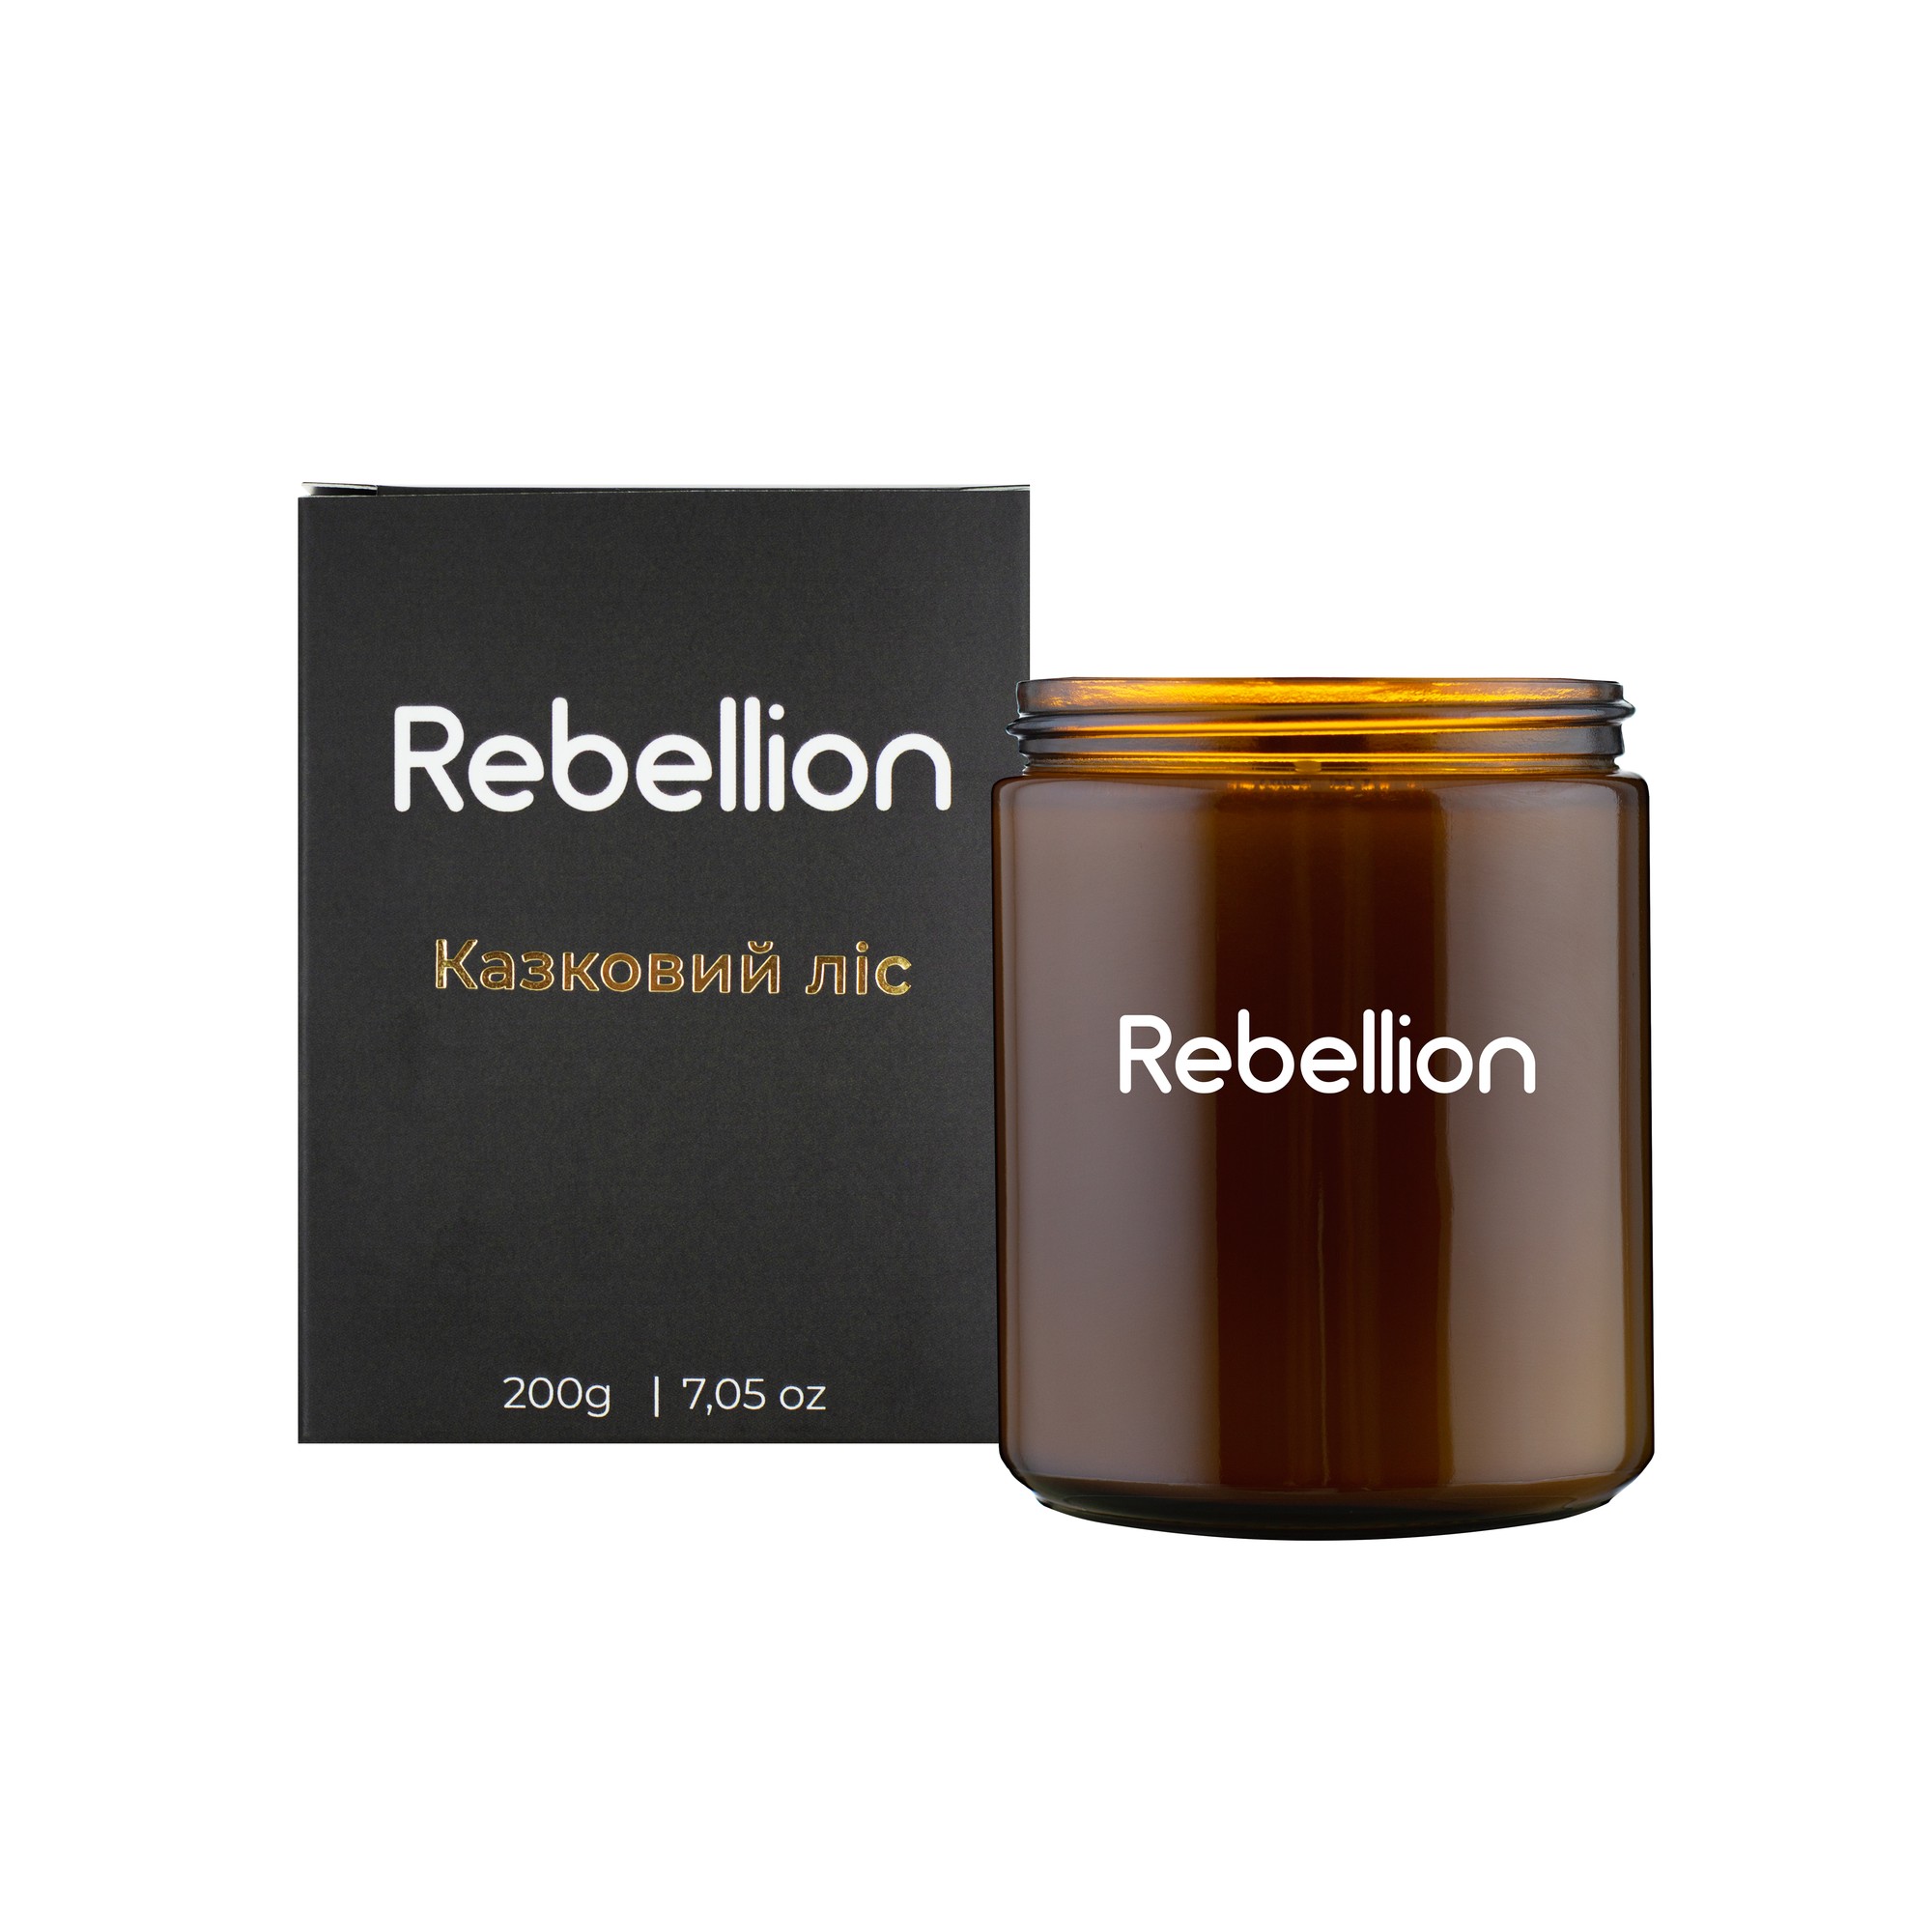 Rebellion Fairy Forest Scented Candle